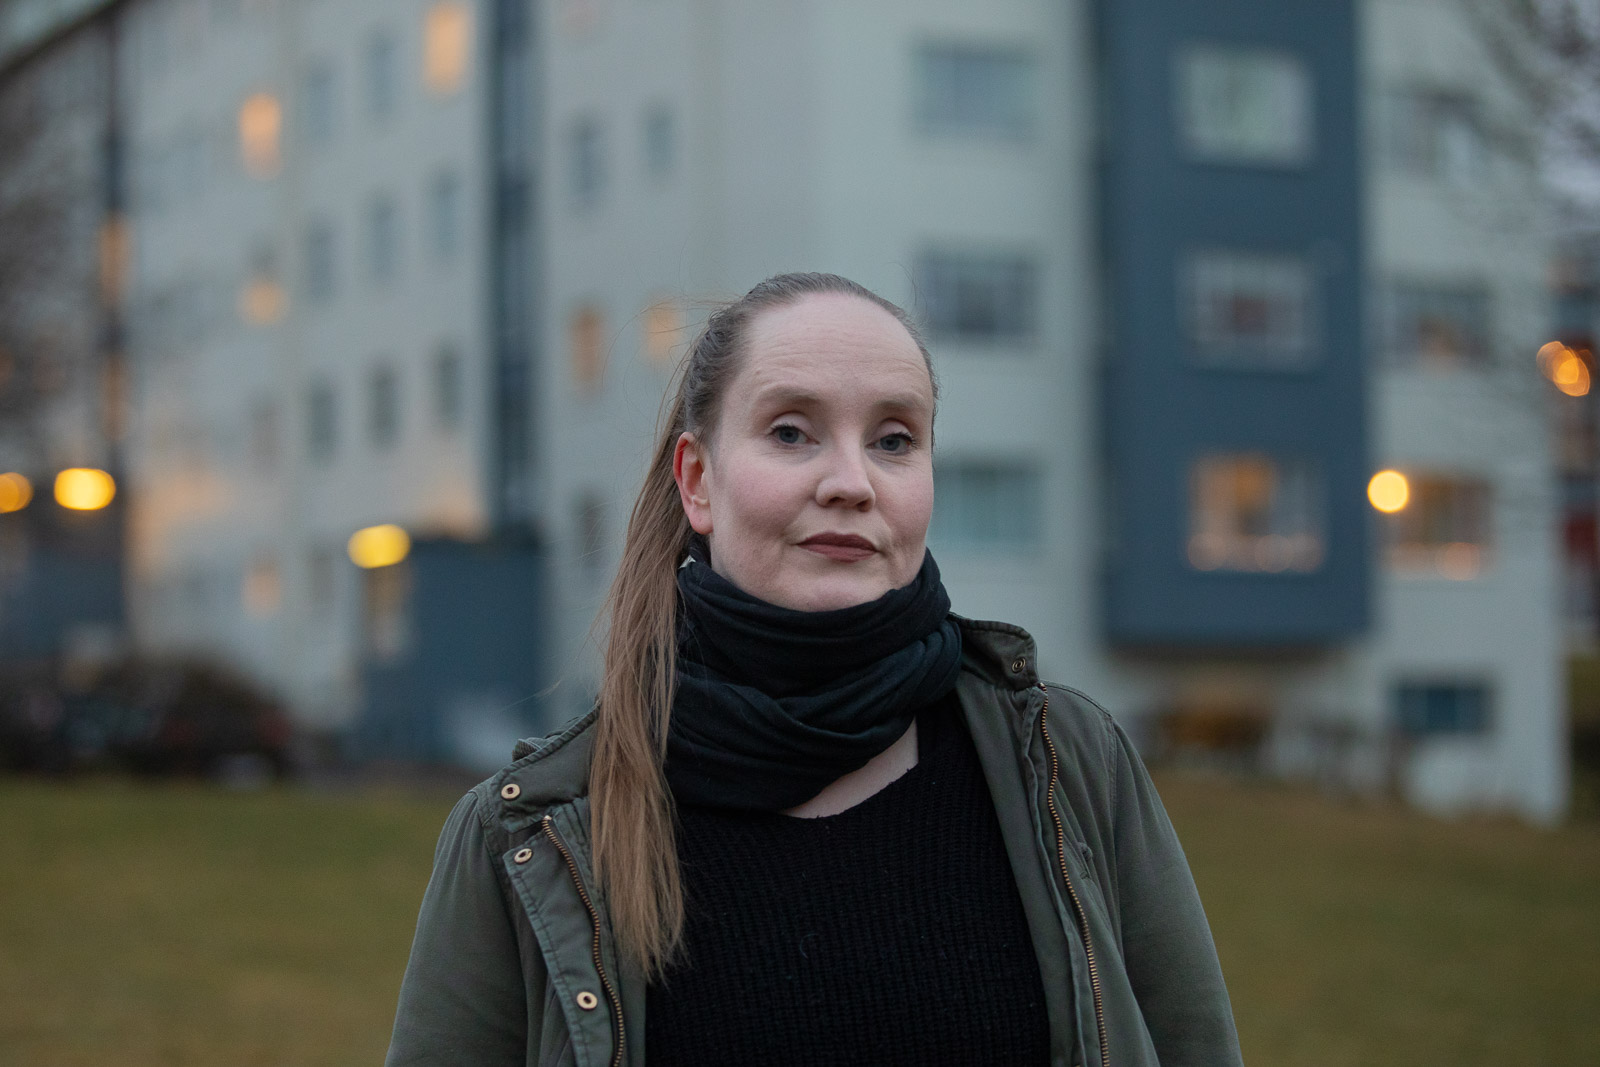 Renting And Being Foreign In Reykjavik